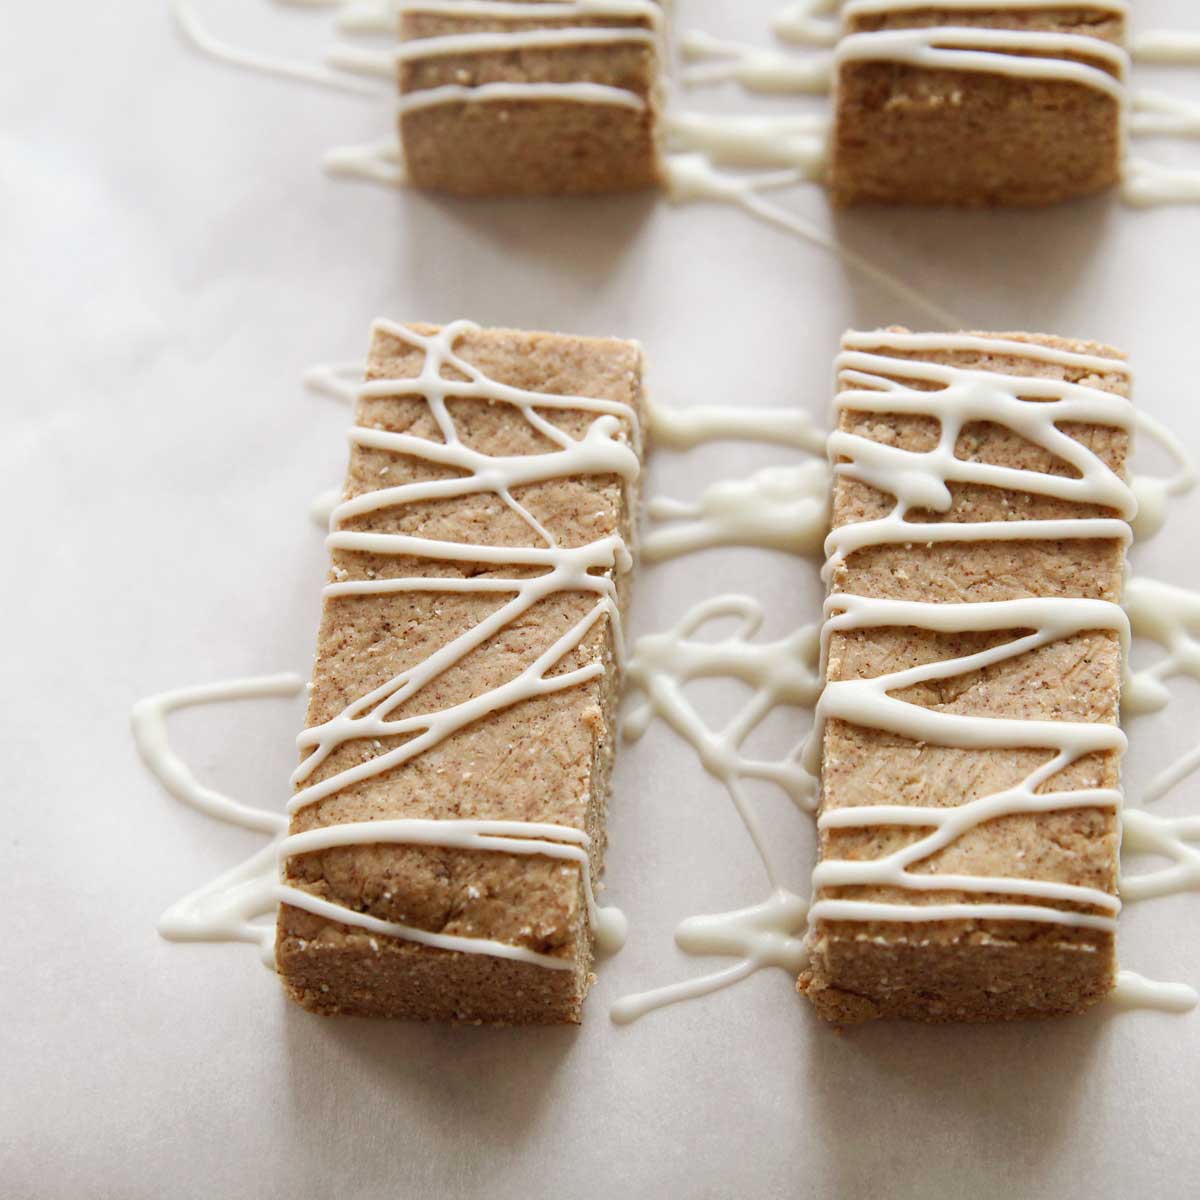 Sweet Cinnamon Roll Protein Bars Recipe Made with Applesauce - Chocolate Protein Balls